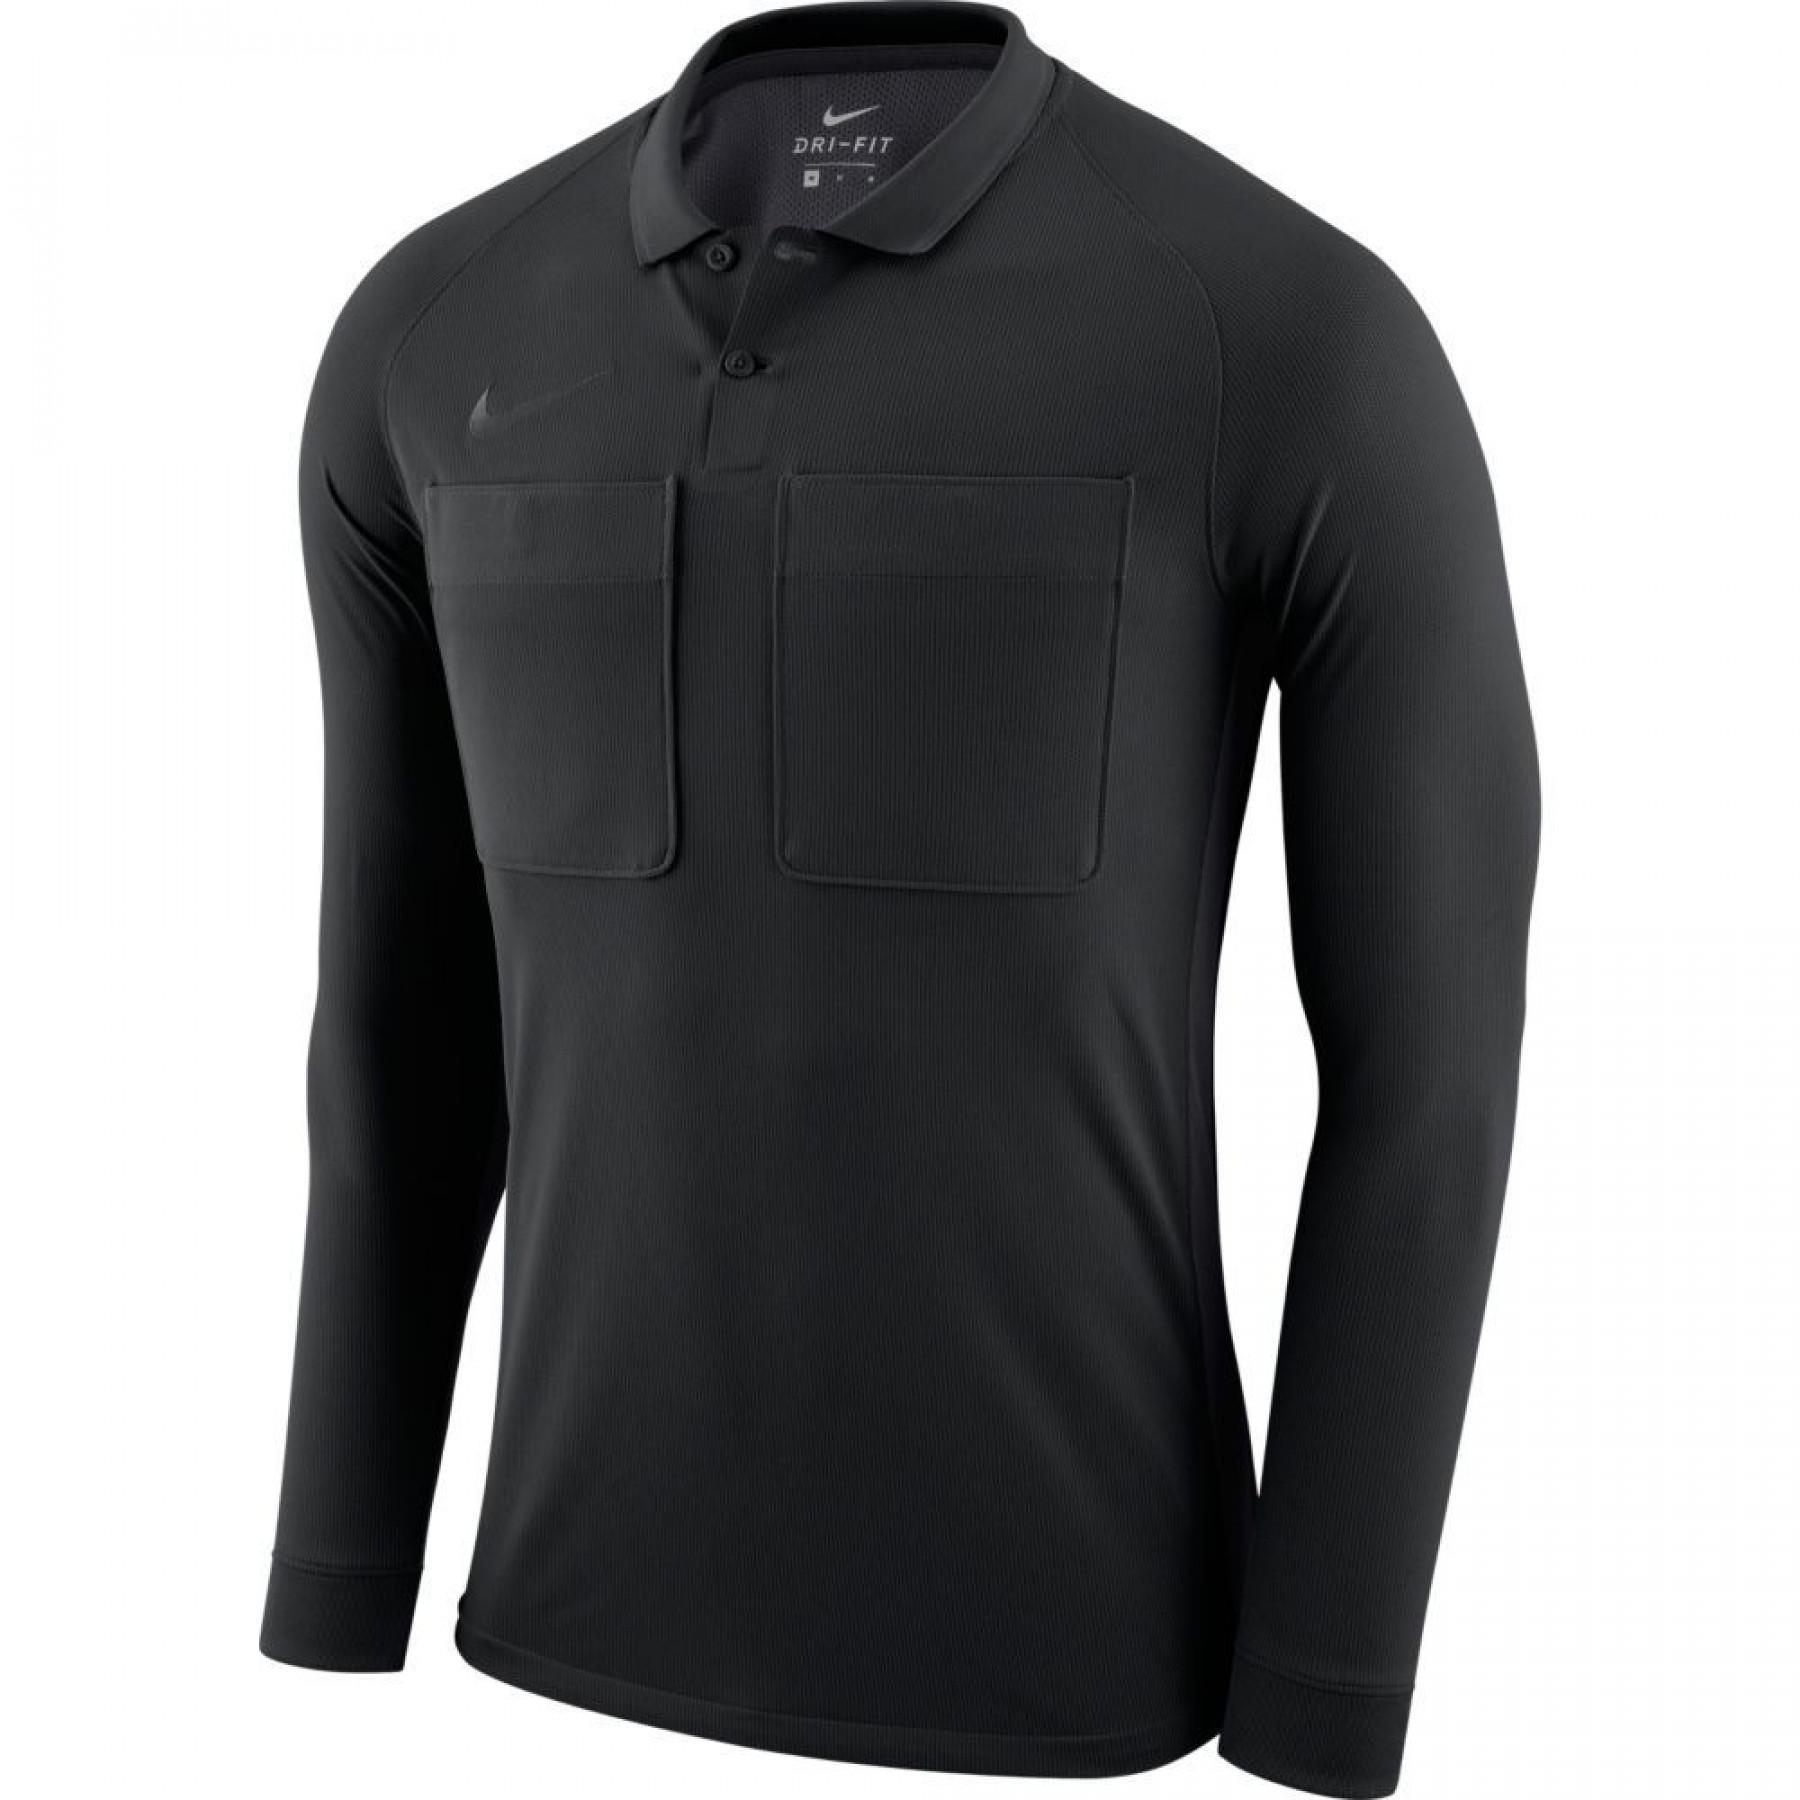 Maillot manches longues Nike dry arbitre 